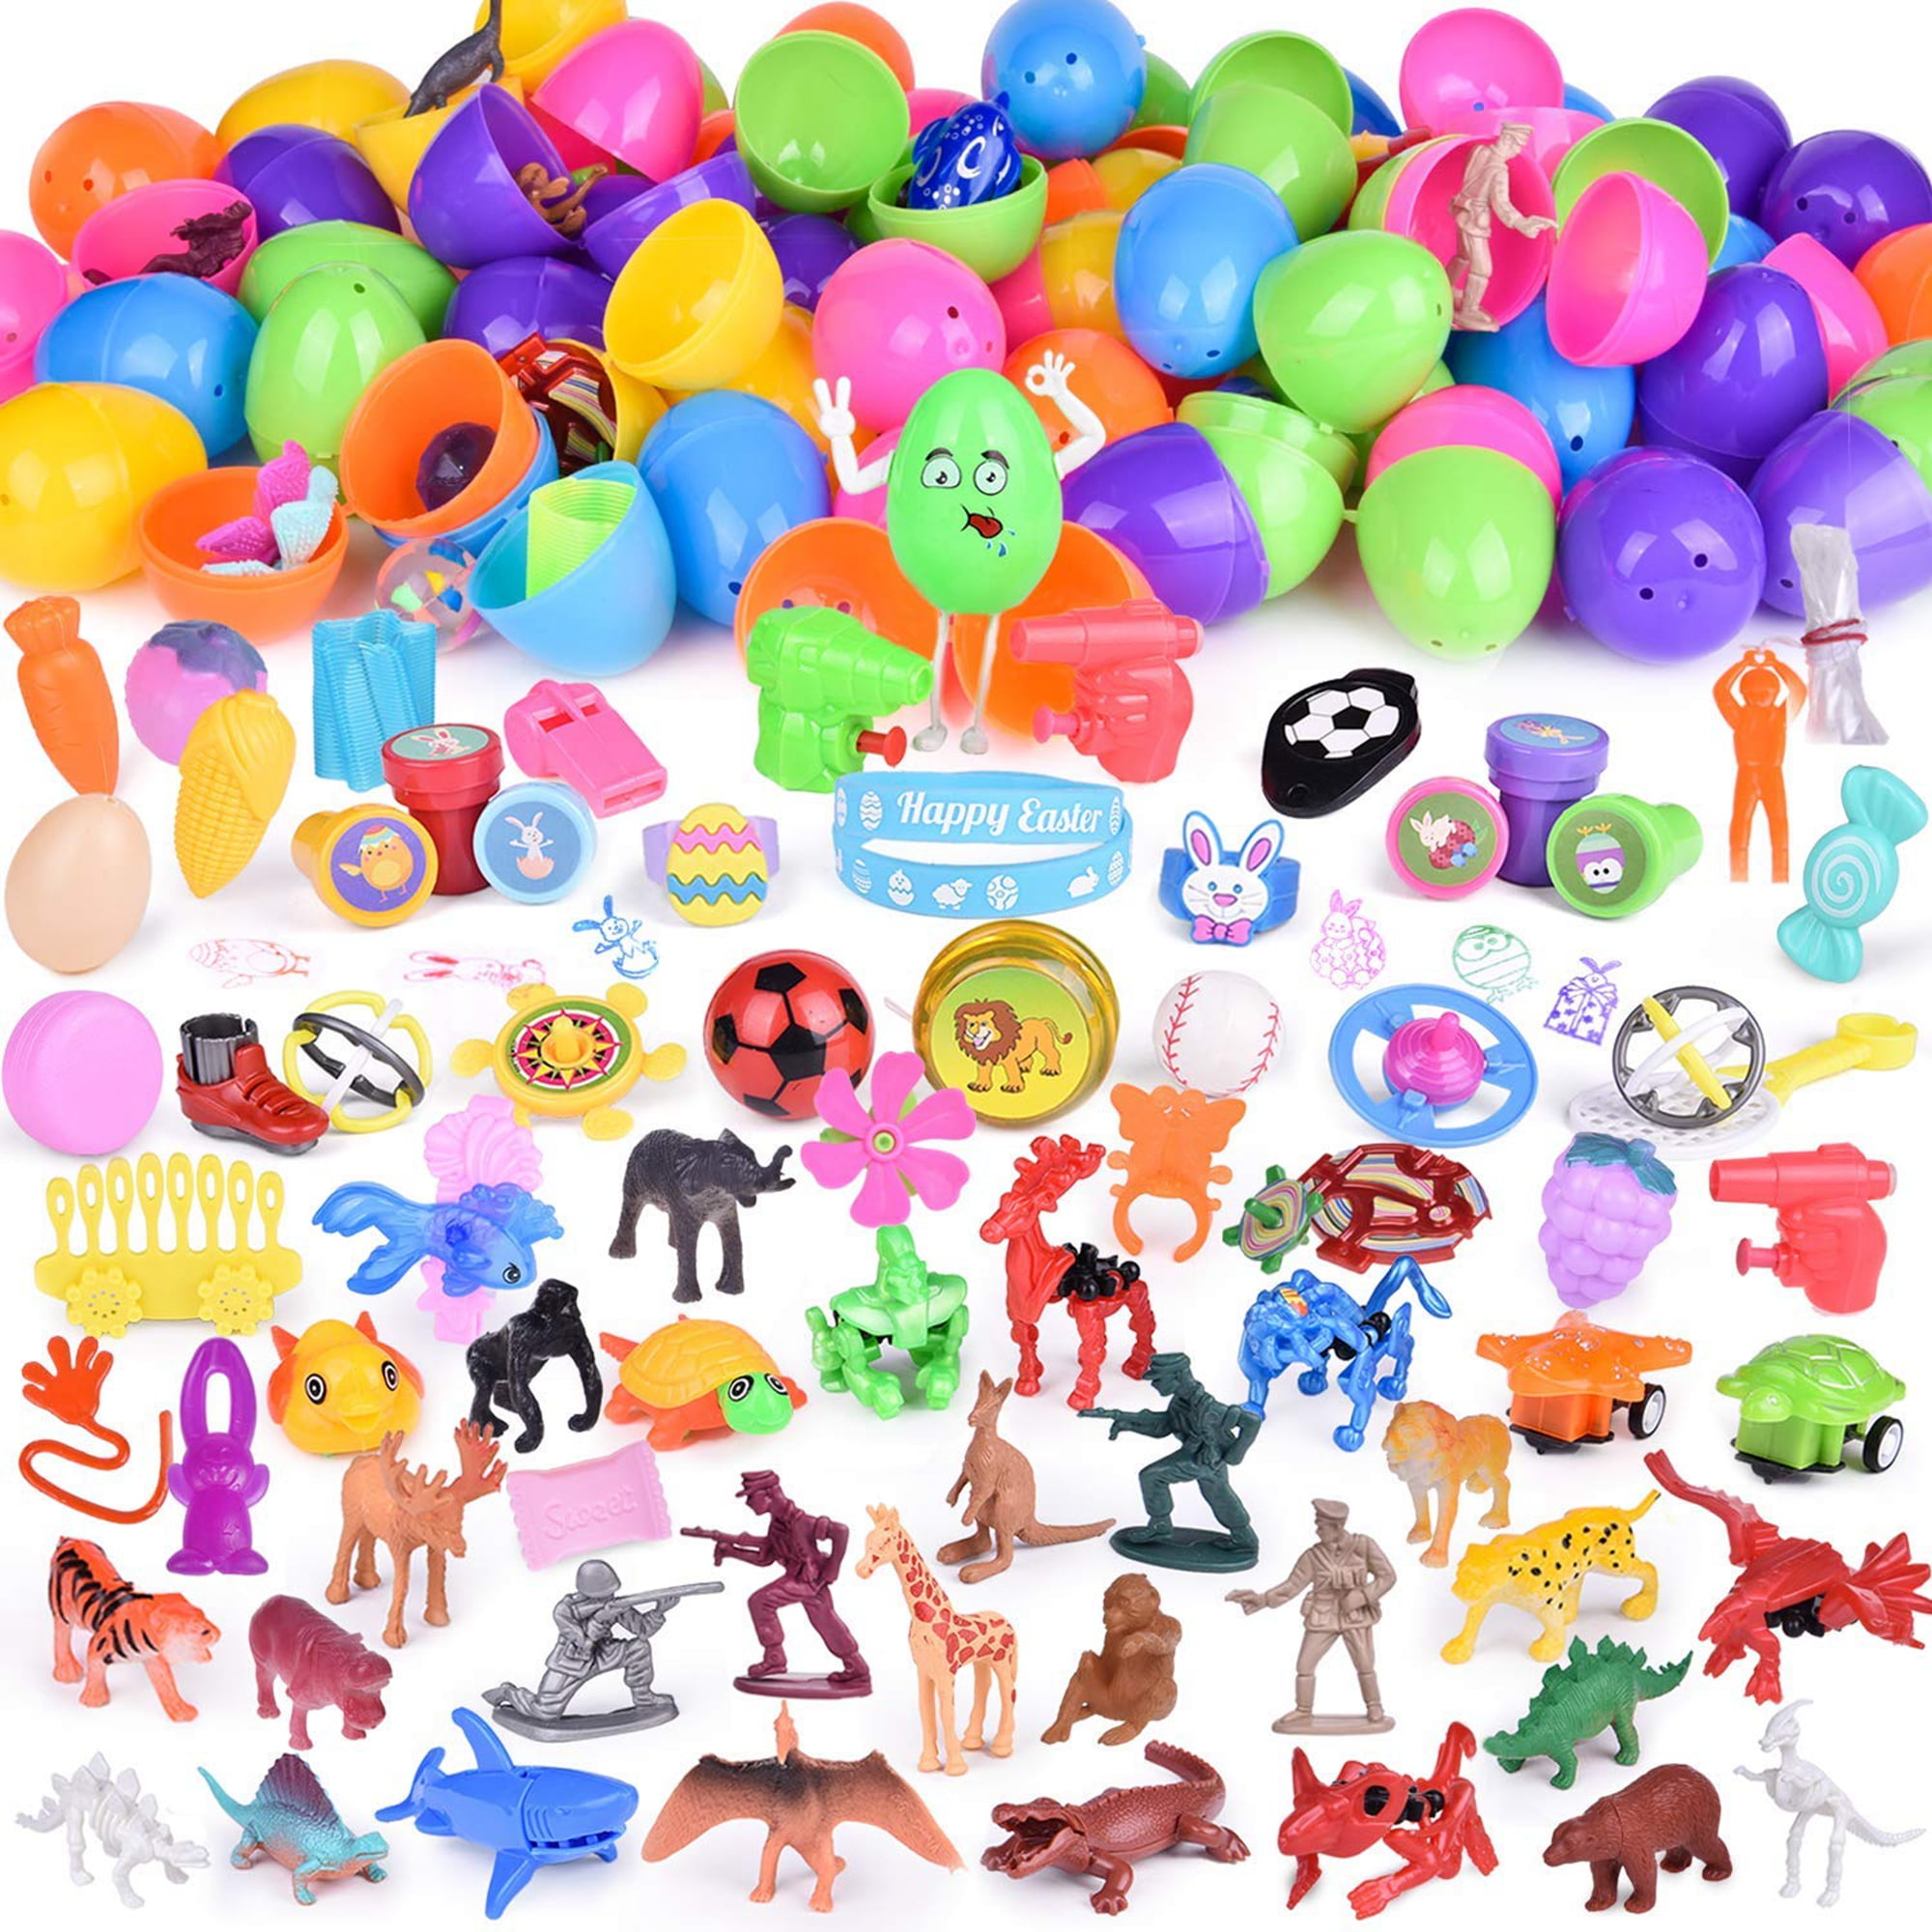 500 Assorted High Quality Premium Toy Filled Easter Eggs 